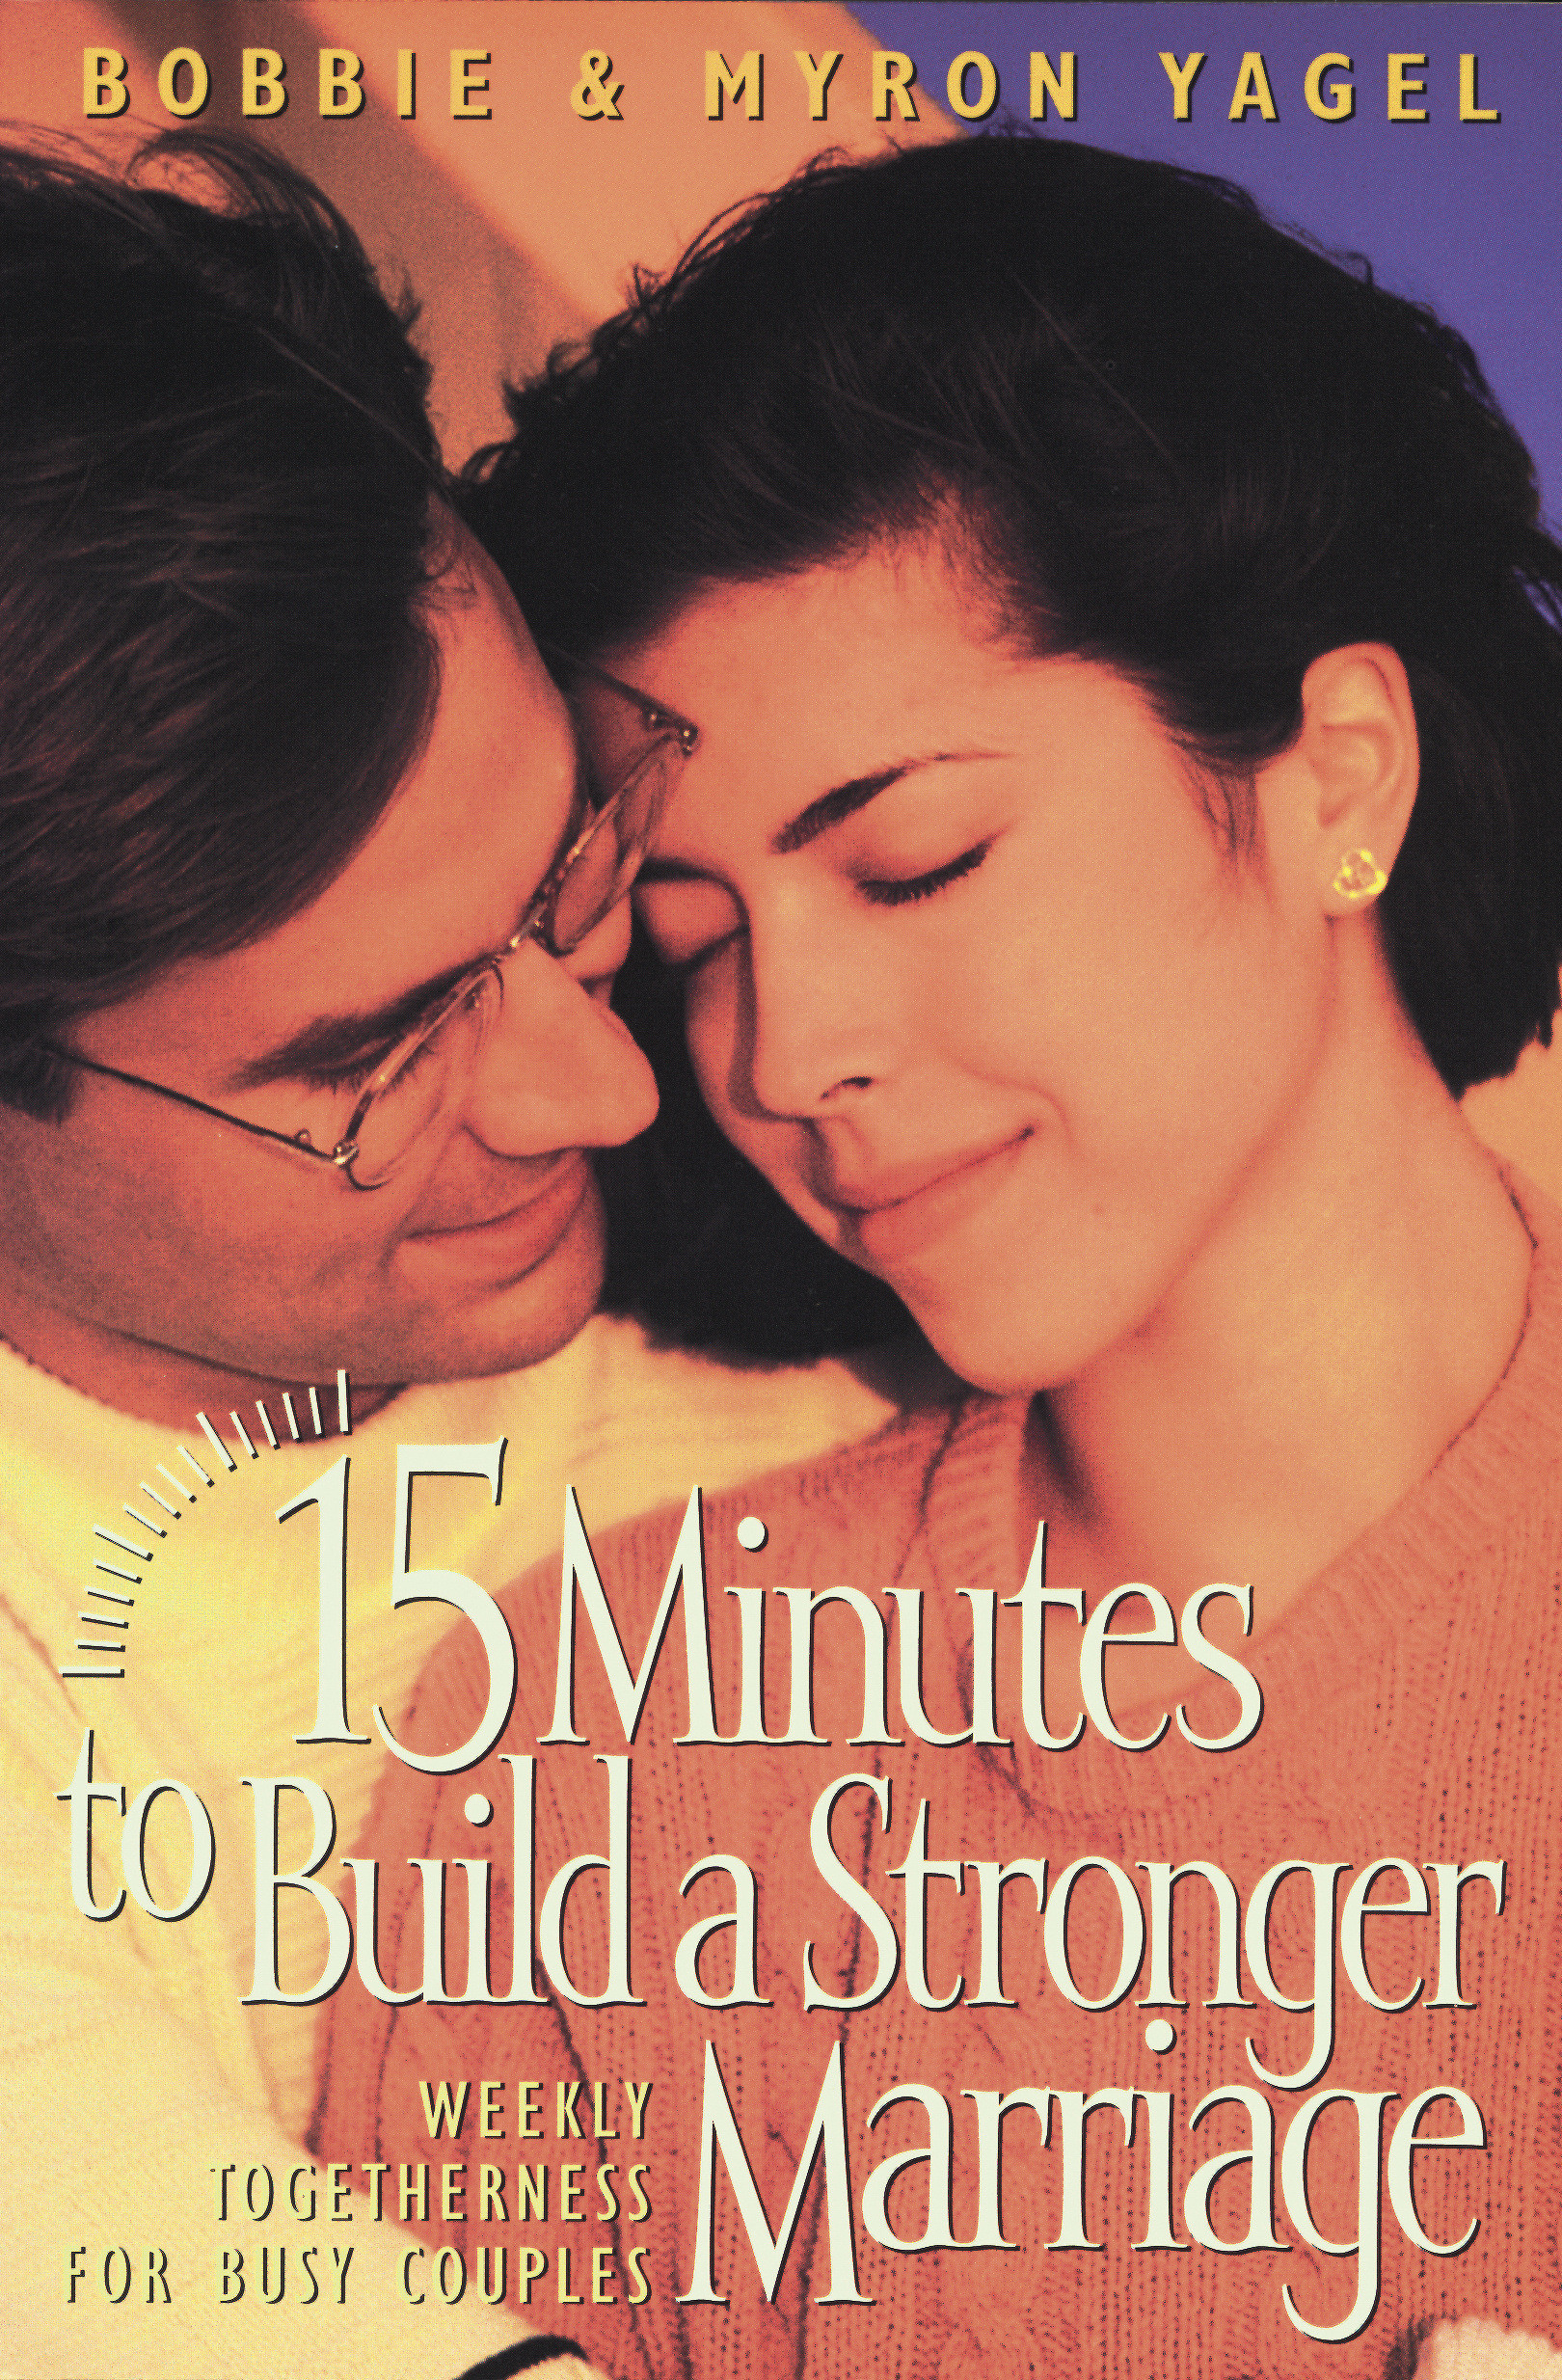 15 Minutes To Build A Stronger Marriage Weekly Togetherness For Busy